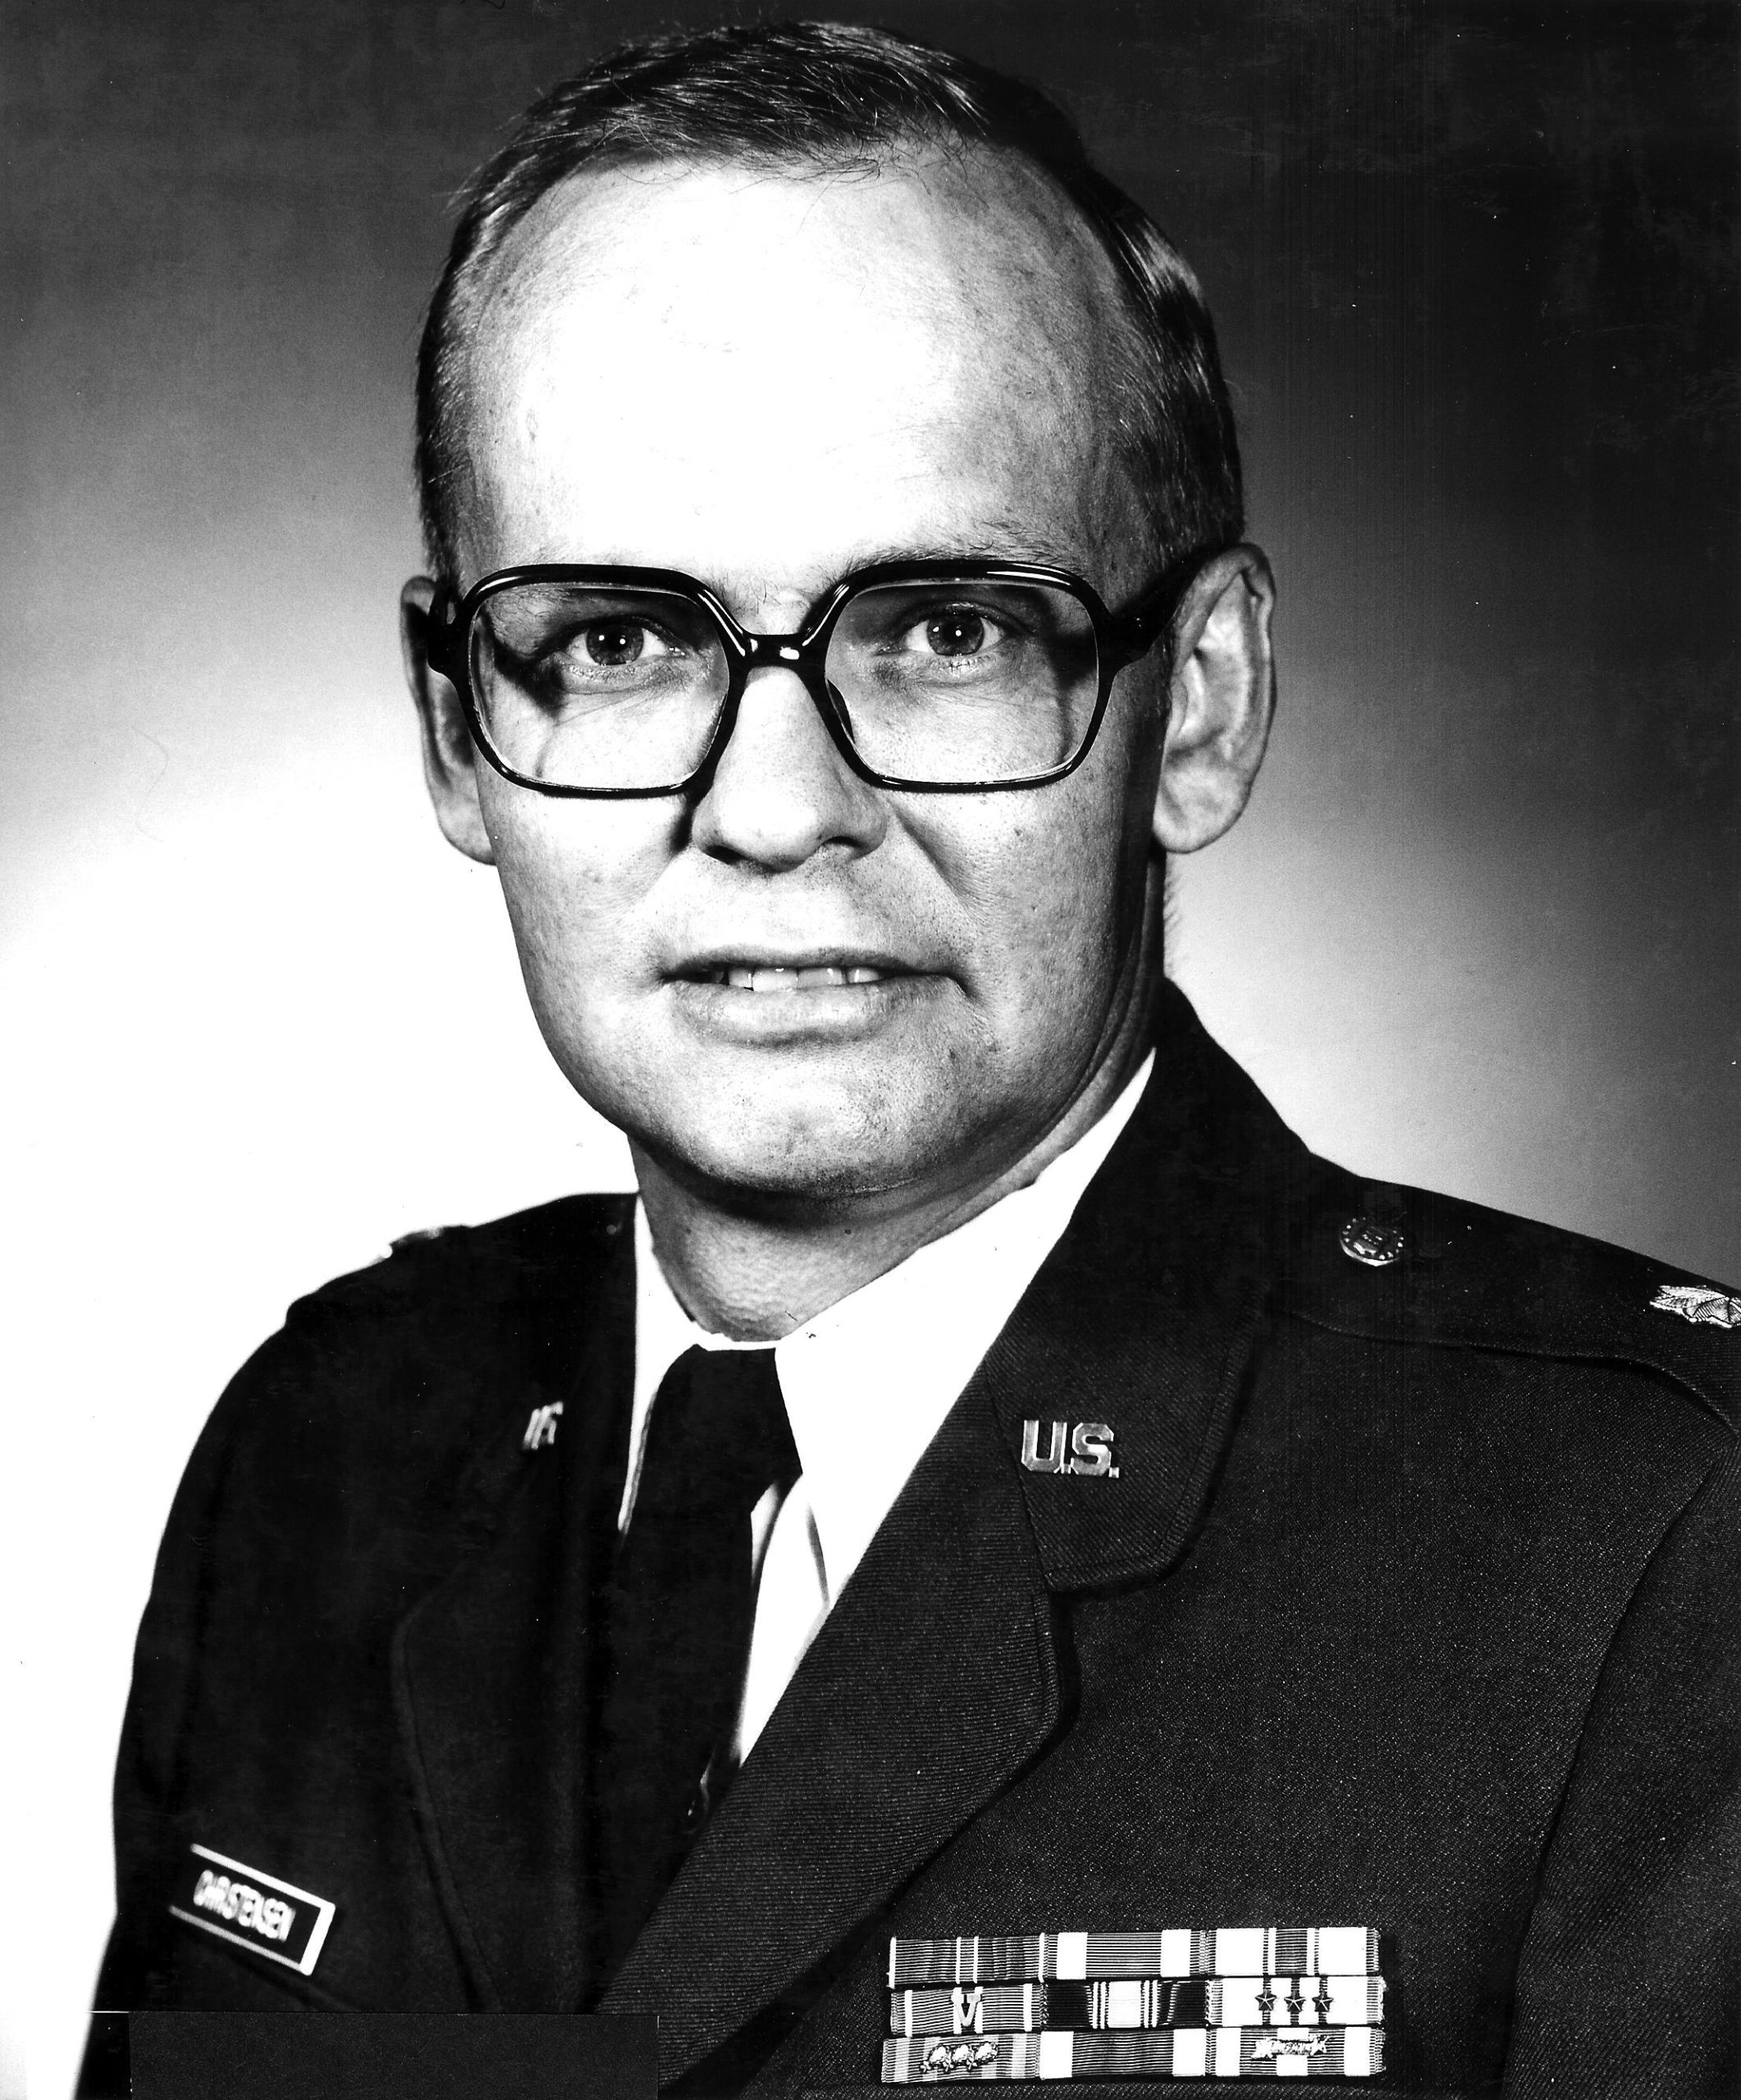 Retired Maj. Jens Christensen served 20 years in the U.S. Air Force.